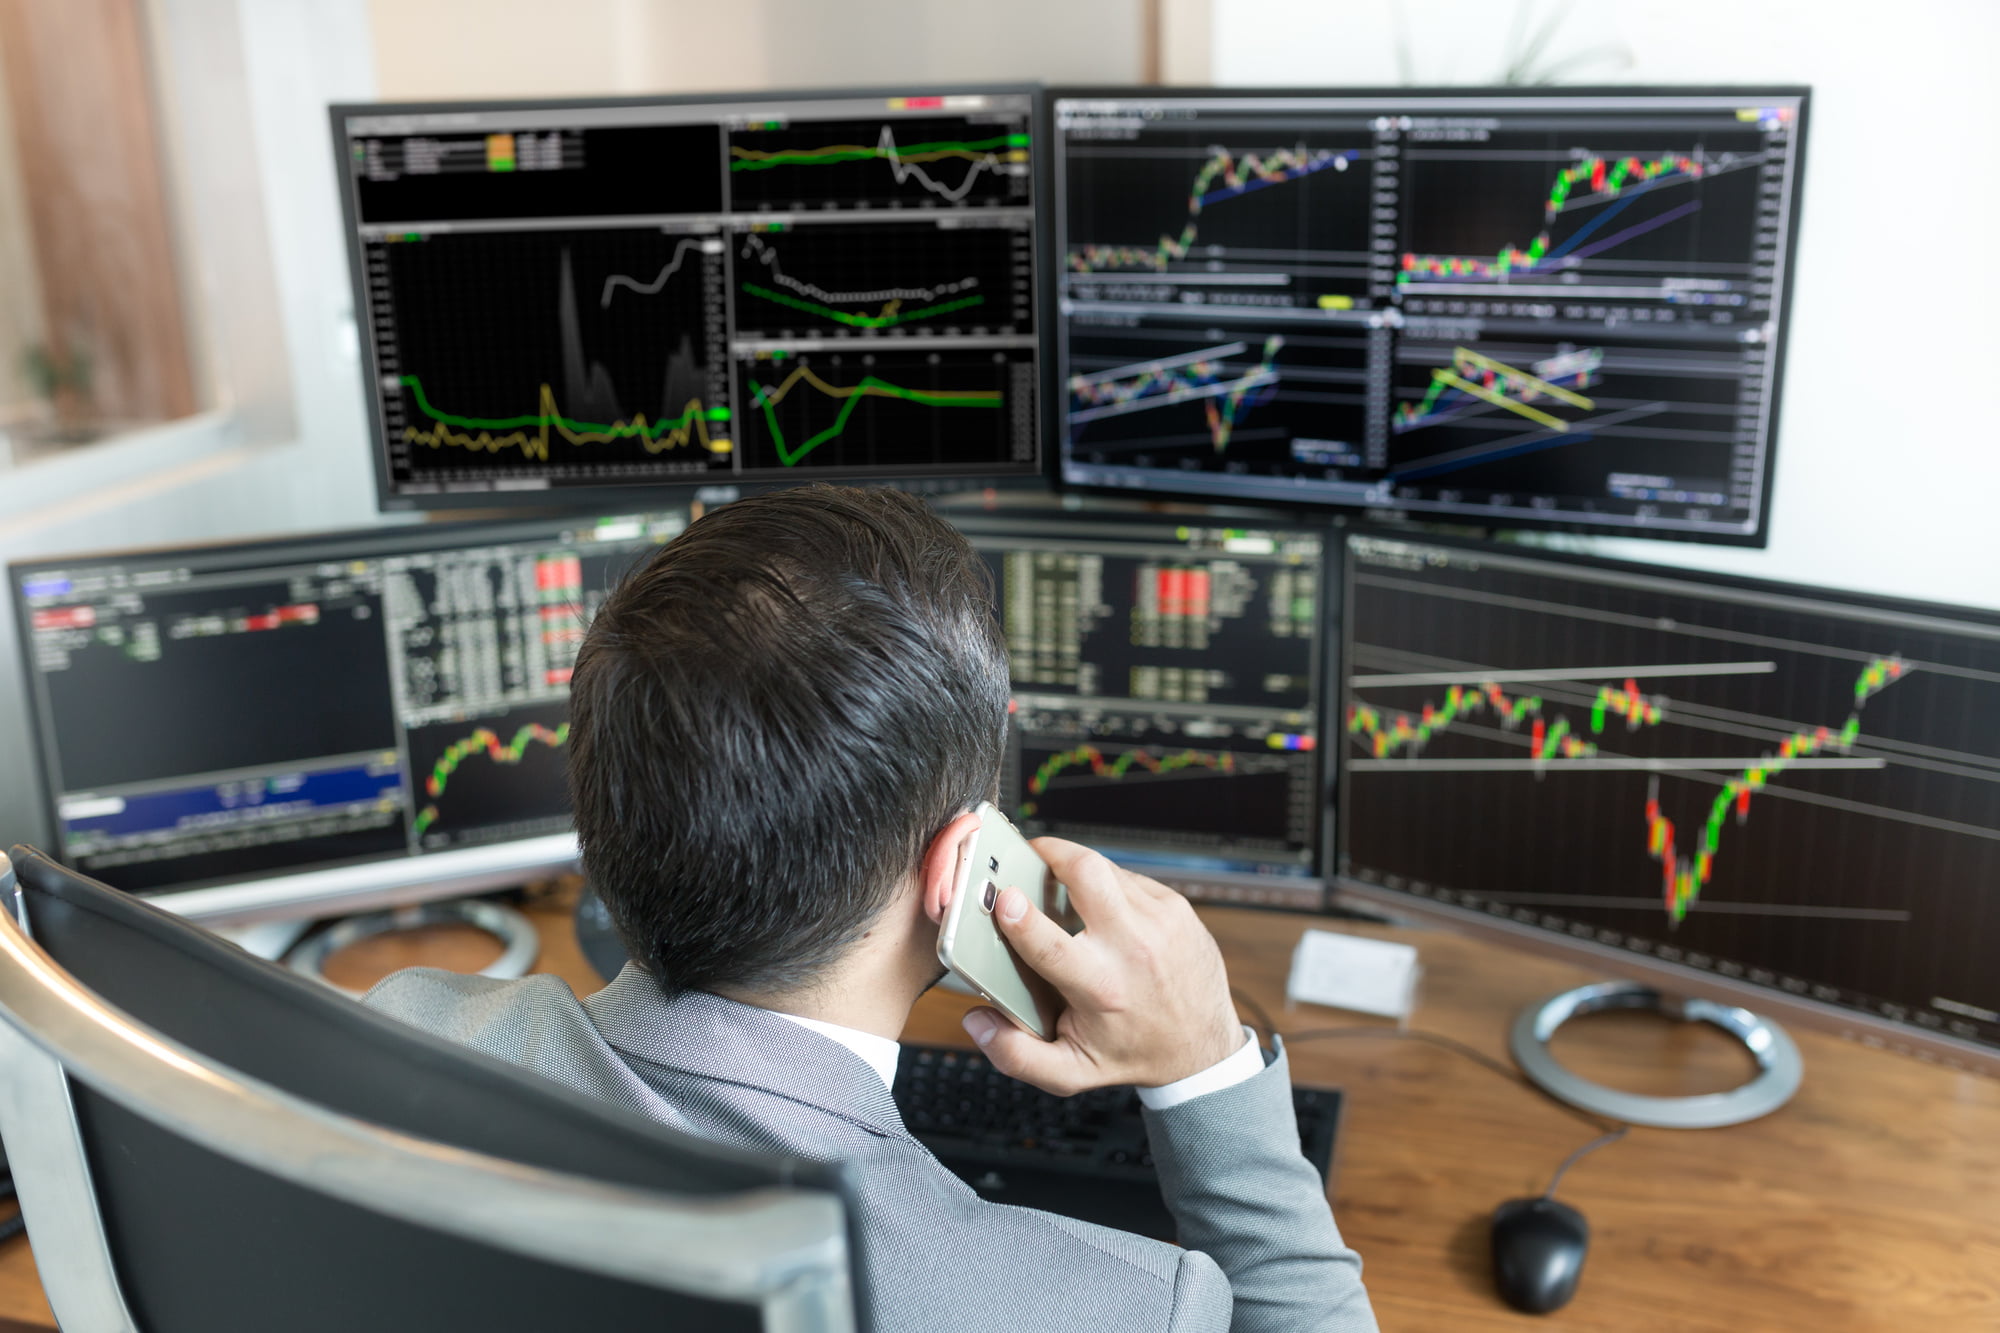 If you're new to the world of investing, explore these essential day trading strategies and tips to maximize the profits that are crucial for success.